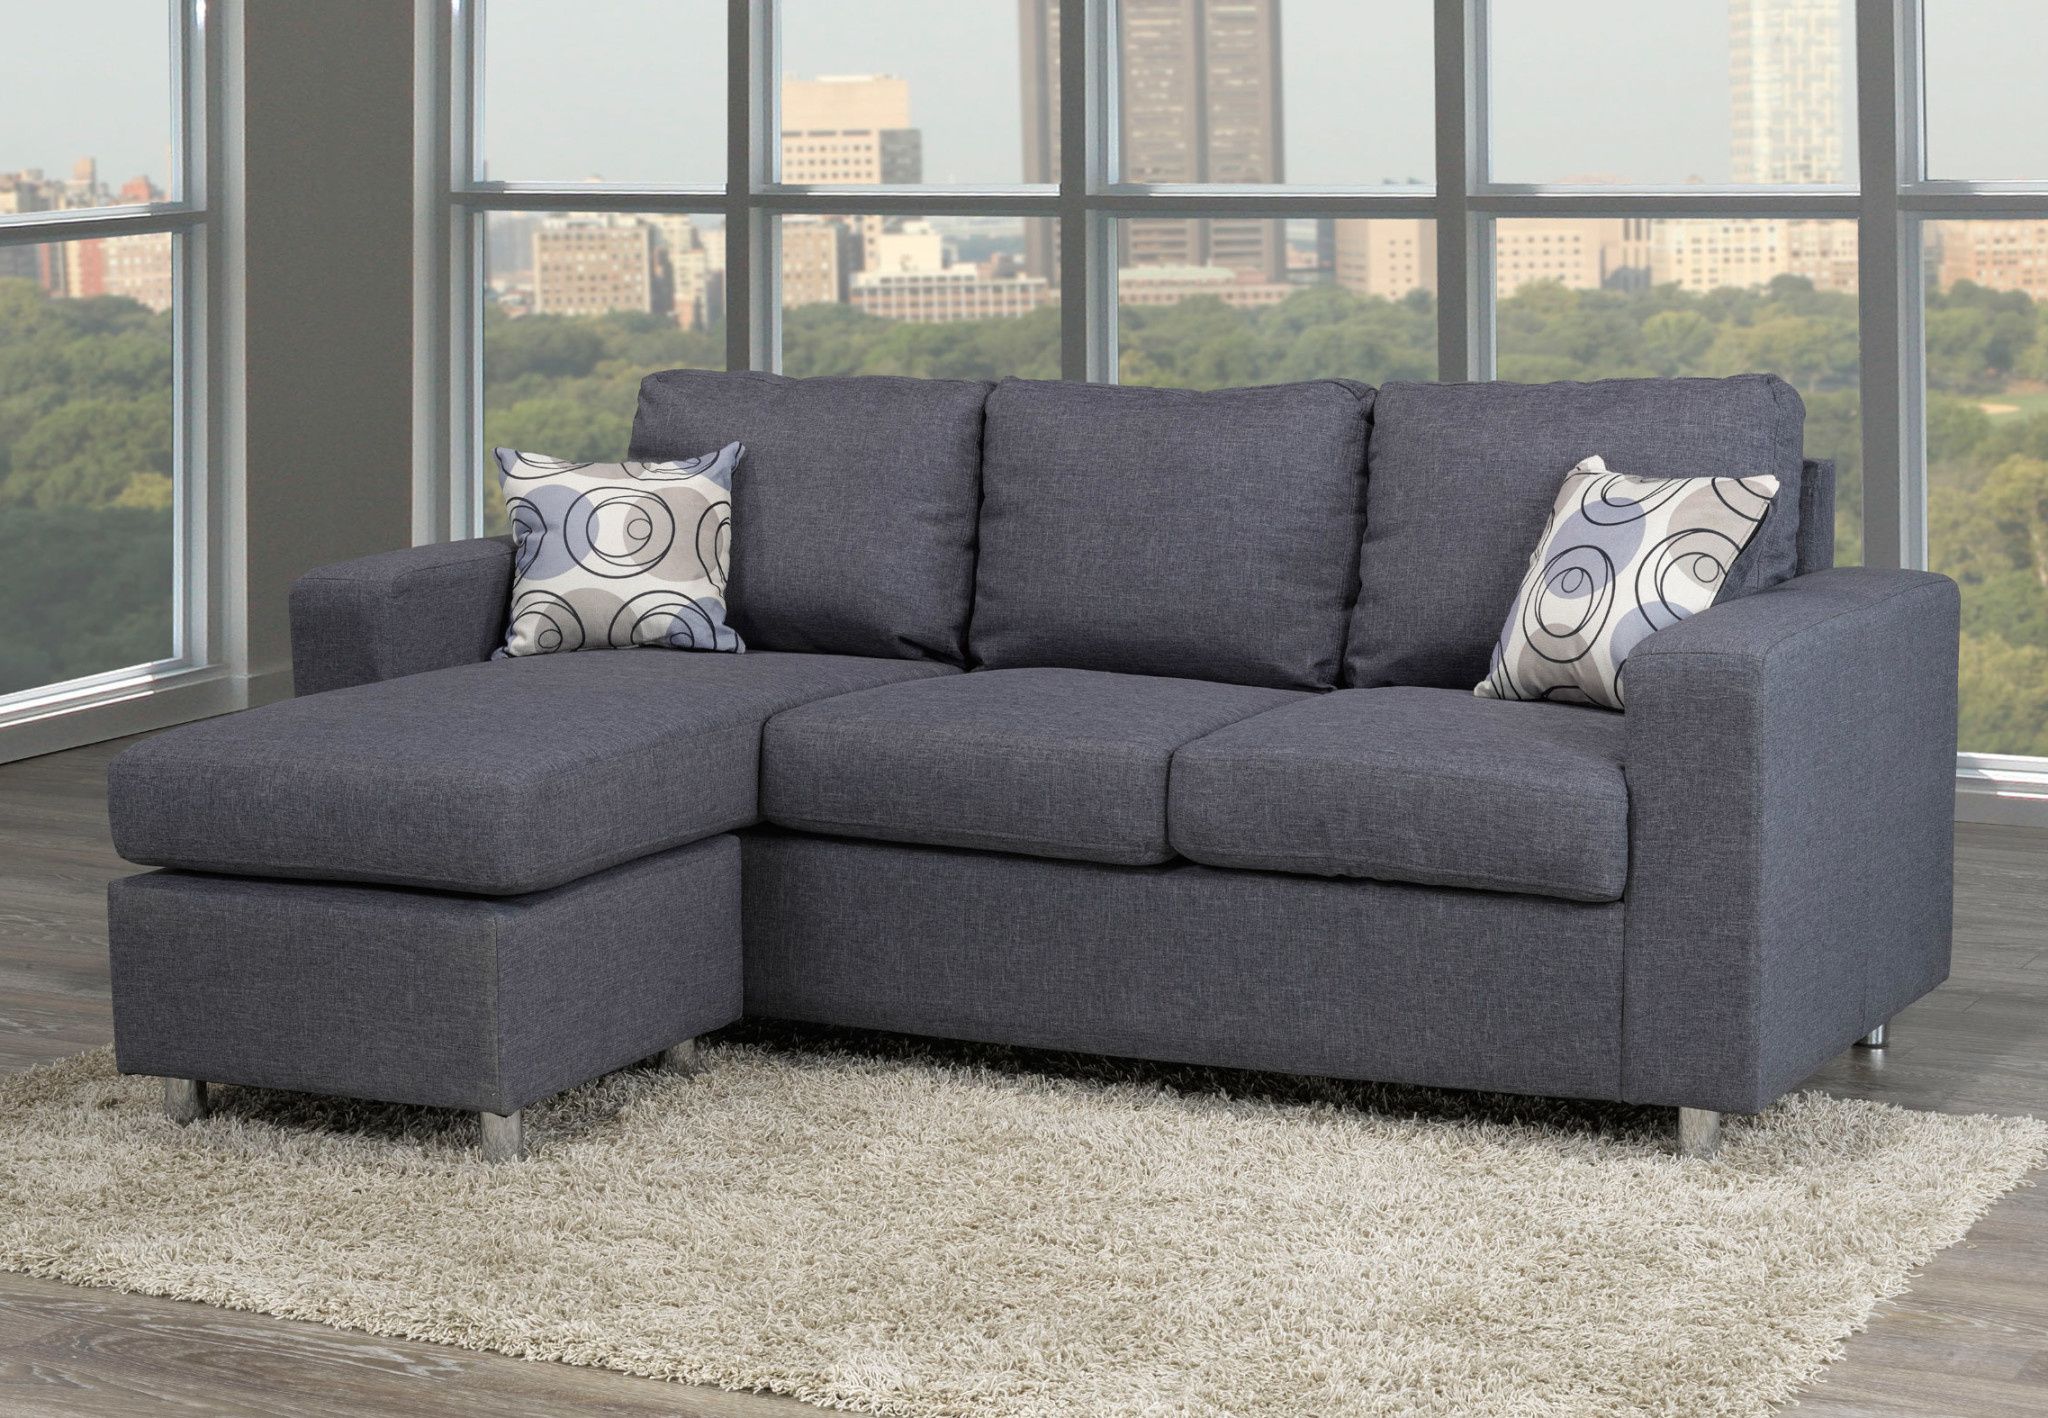 Compact Reversible Grey Sofa Sectional – Dani's Furniture Intended For Most Recently Released Reversible Sectional Sofas (View 5 of 15)